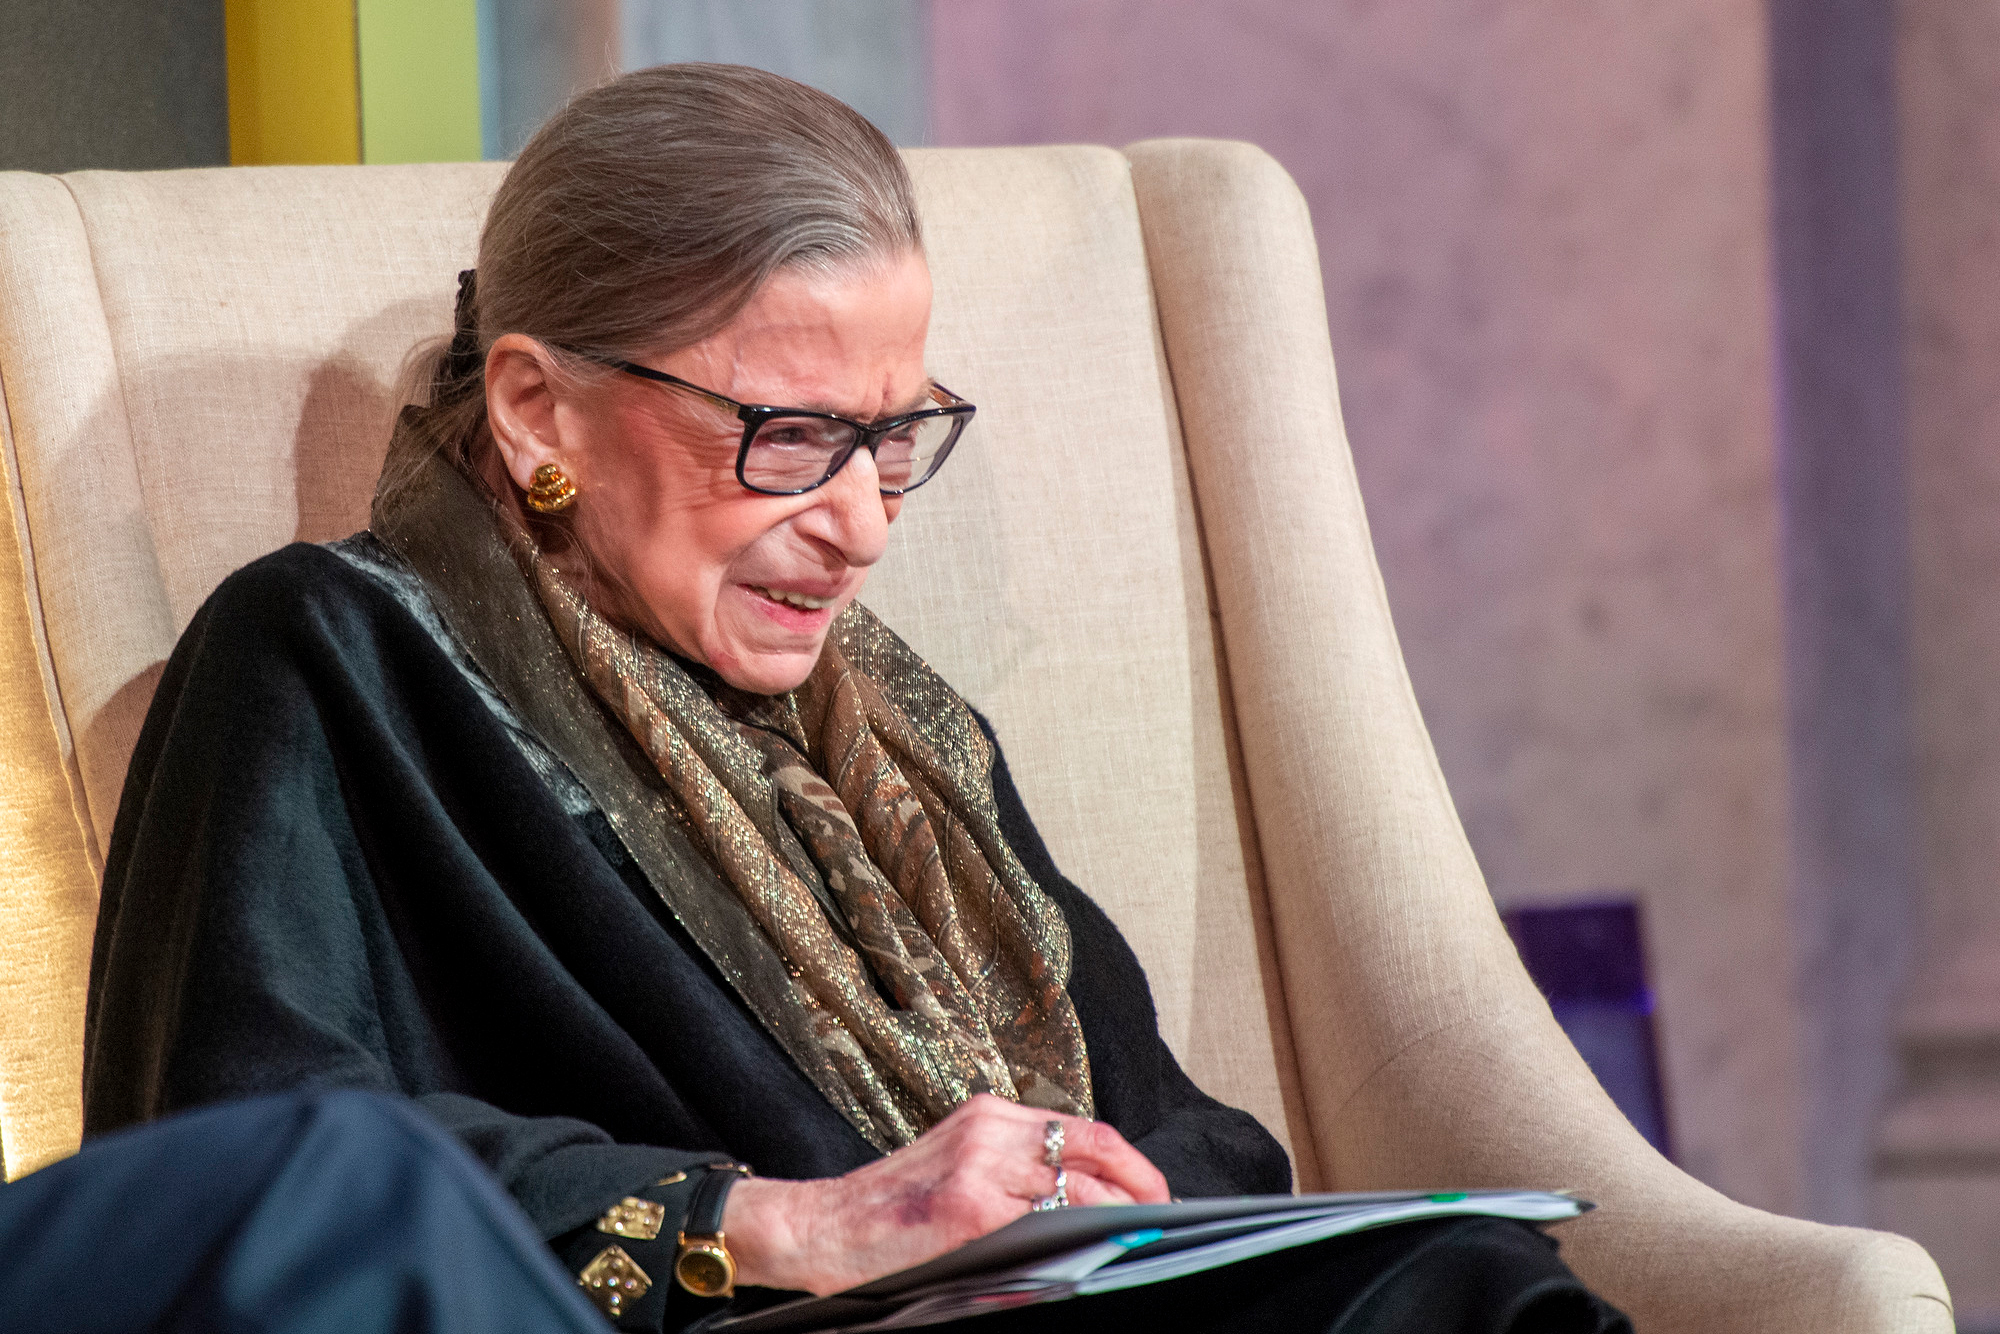 Associate Justice Ruth Bader Ginsburg of the Supreme Court of the United States. LBJ Foundation photo by Jay Godwin.